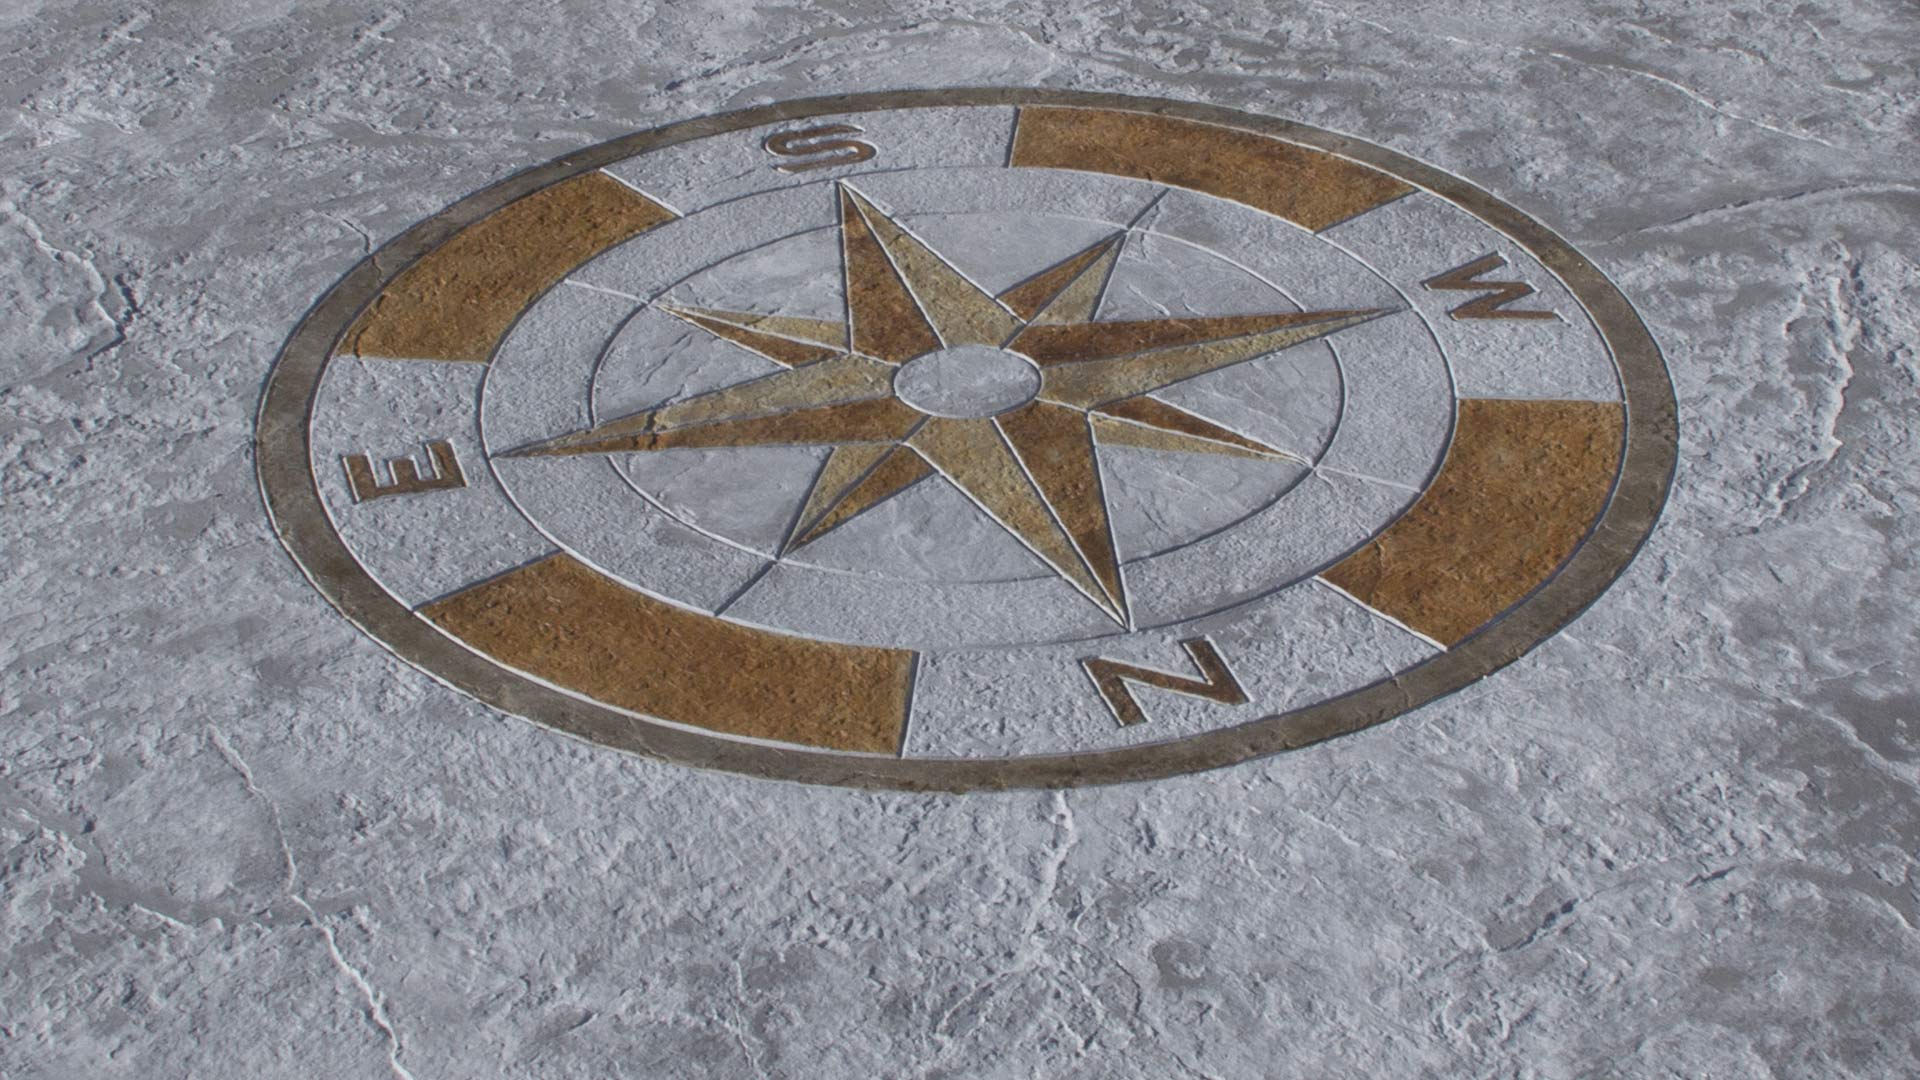 imprinted pavement with white and golden compass rose mold